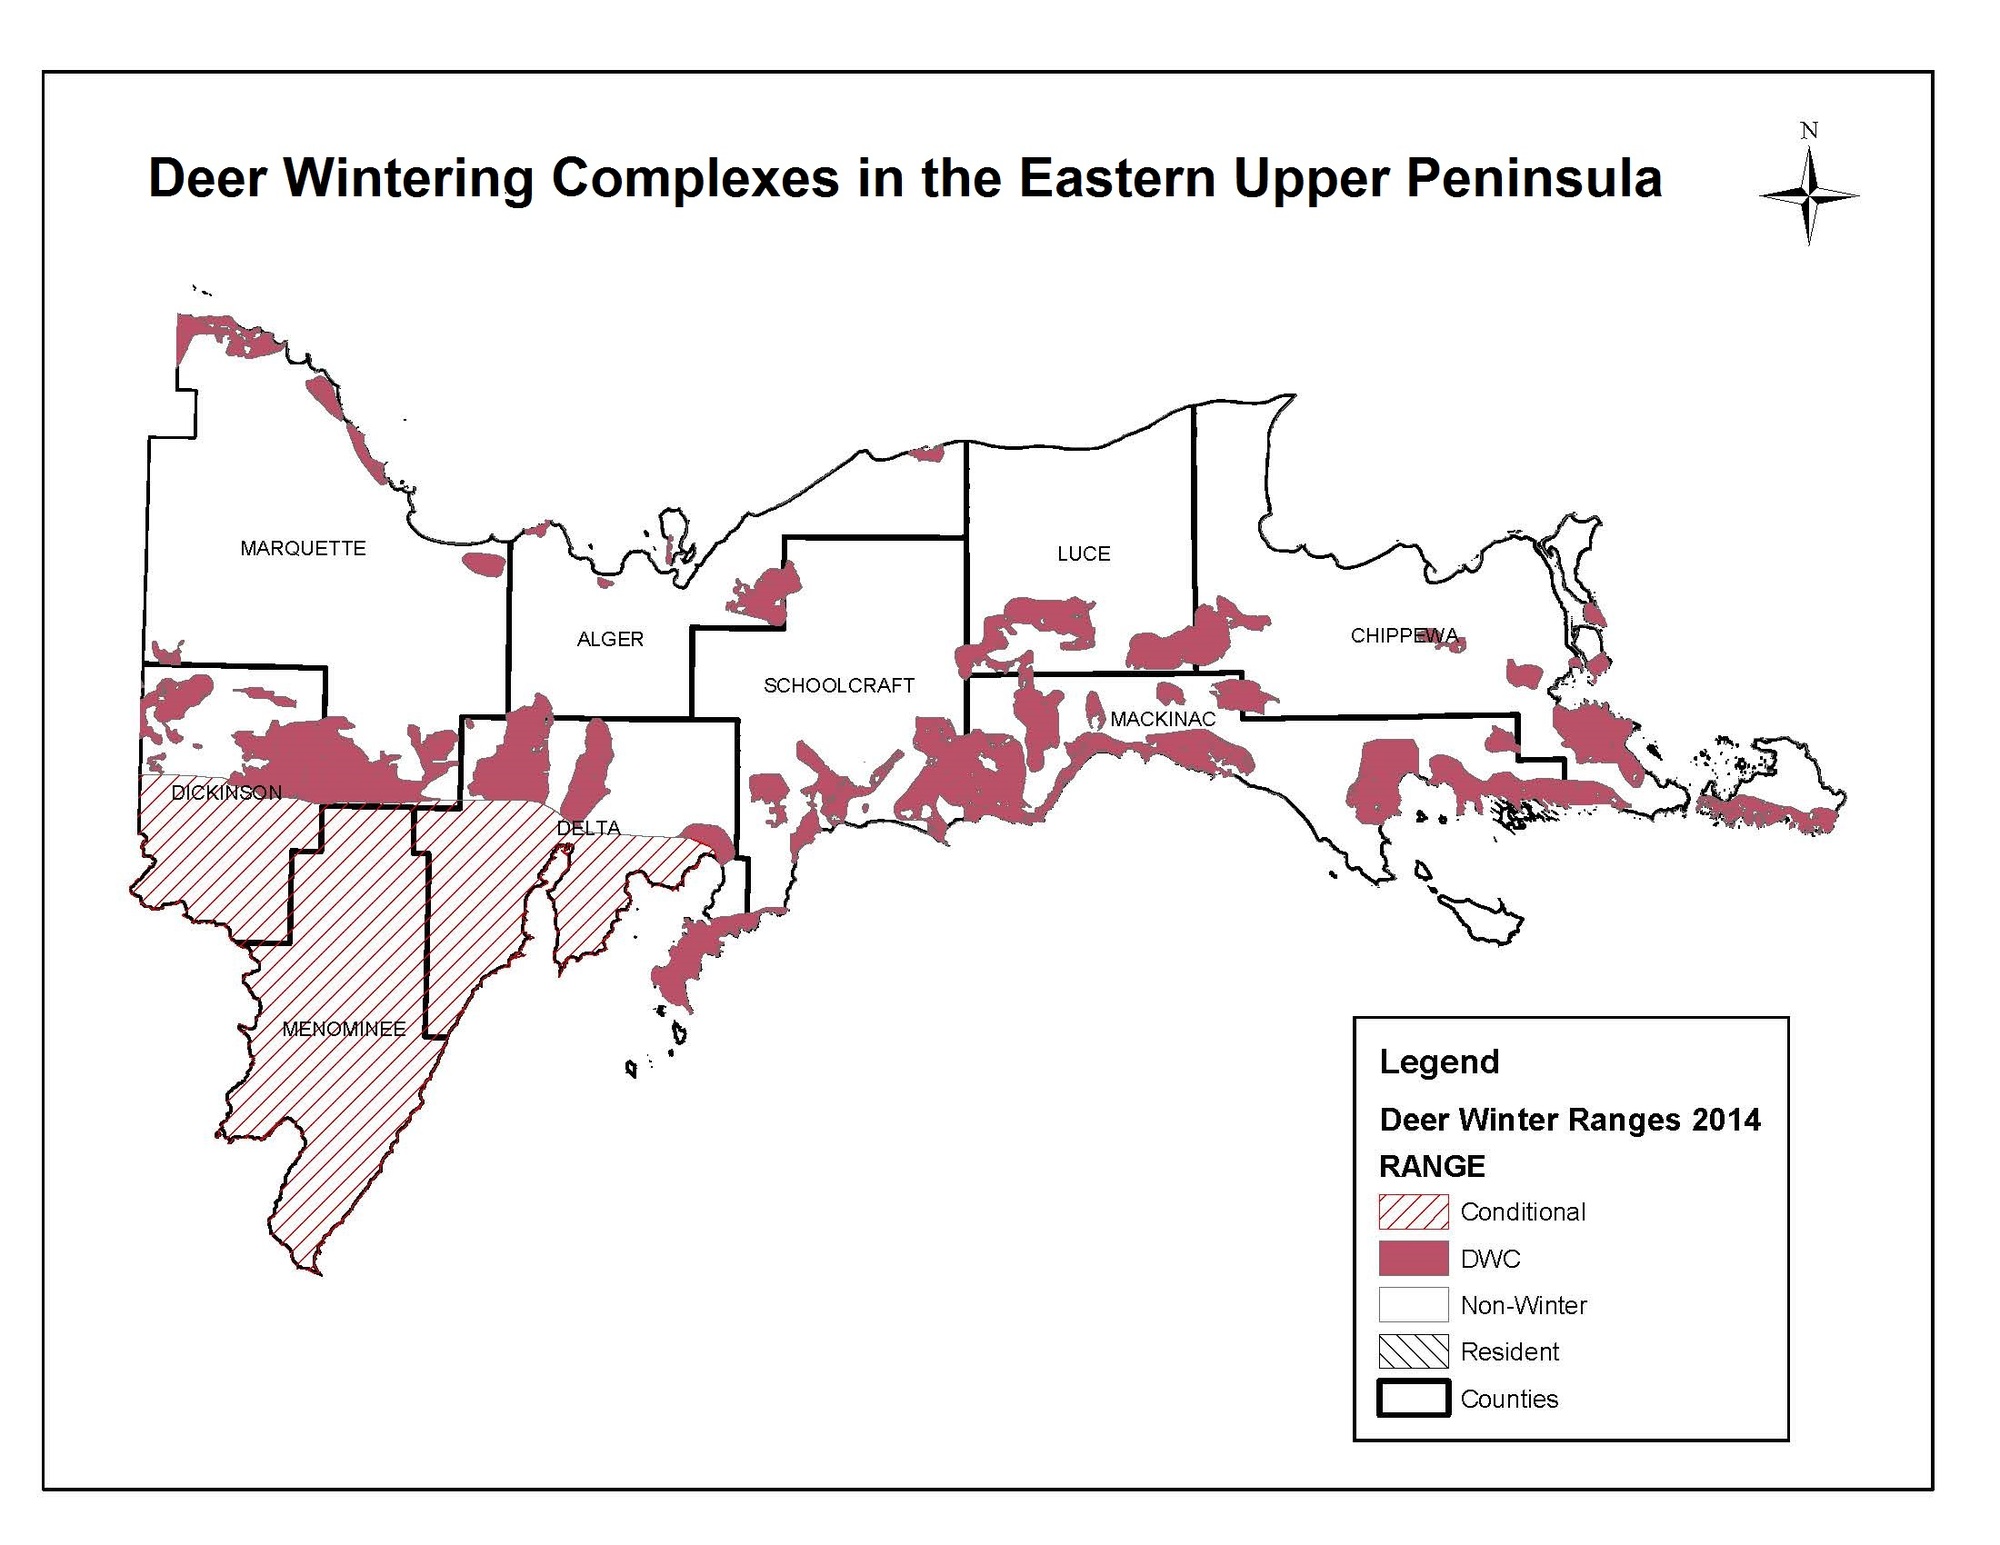 A map show deer wintering complexes in the eastern half of the Upper Peninsula.